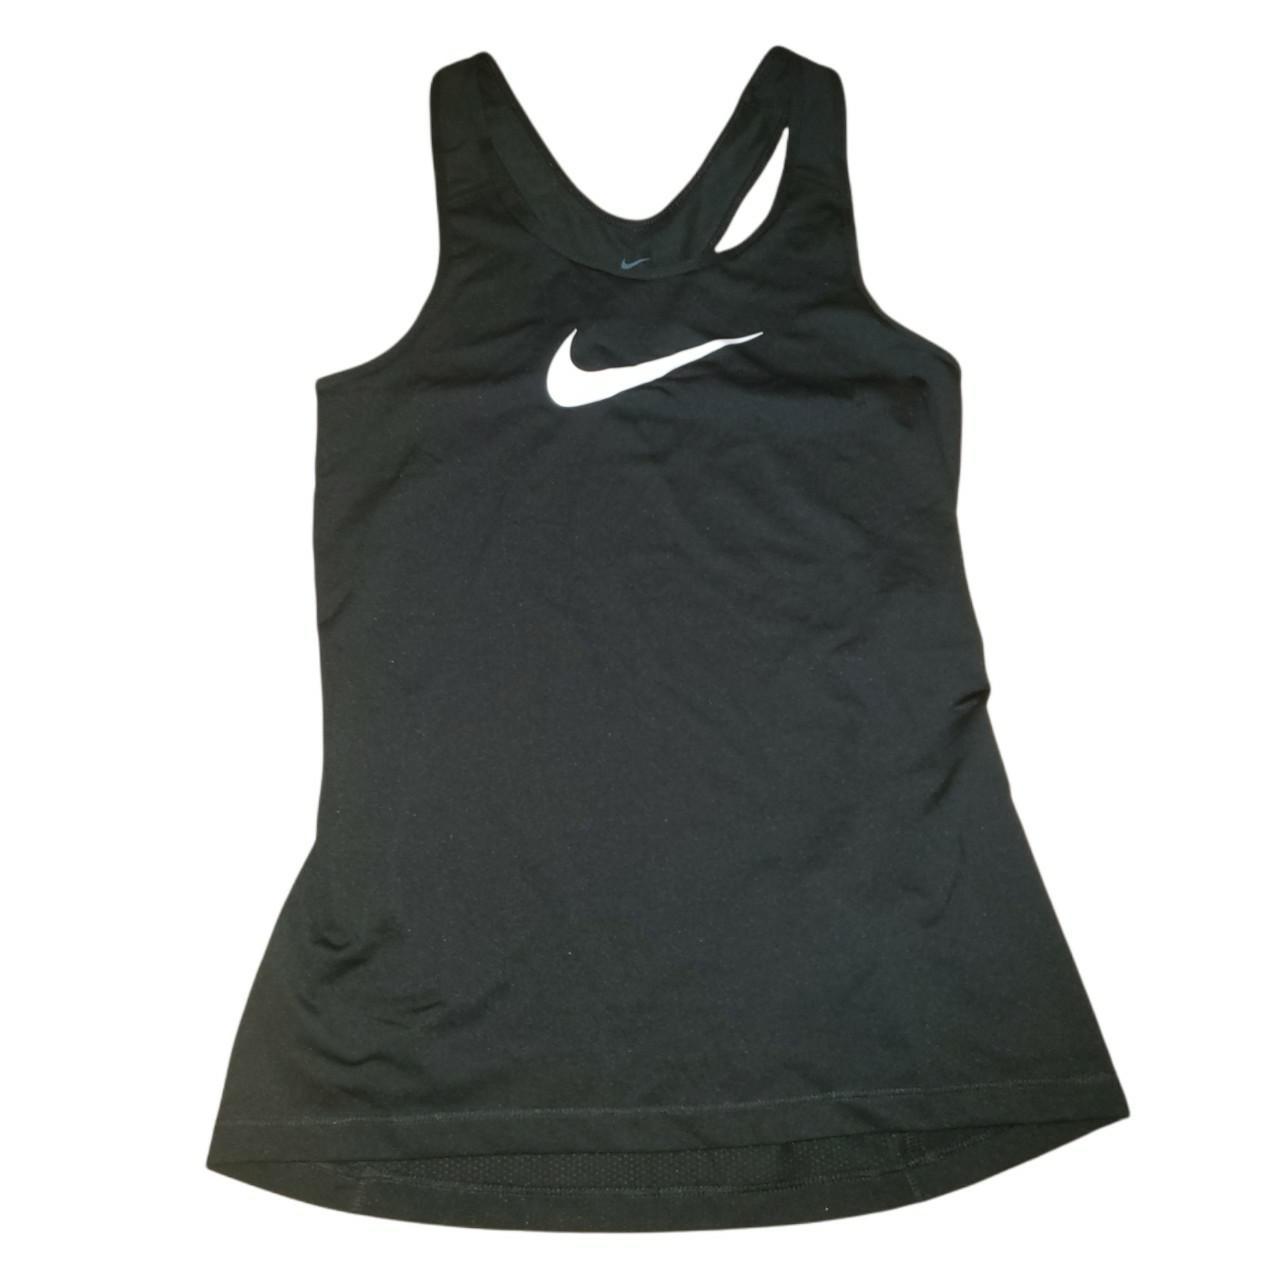 Product Image 1 - Nike Dri-Fit Tank Top.
Size Small,